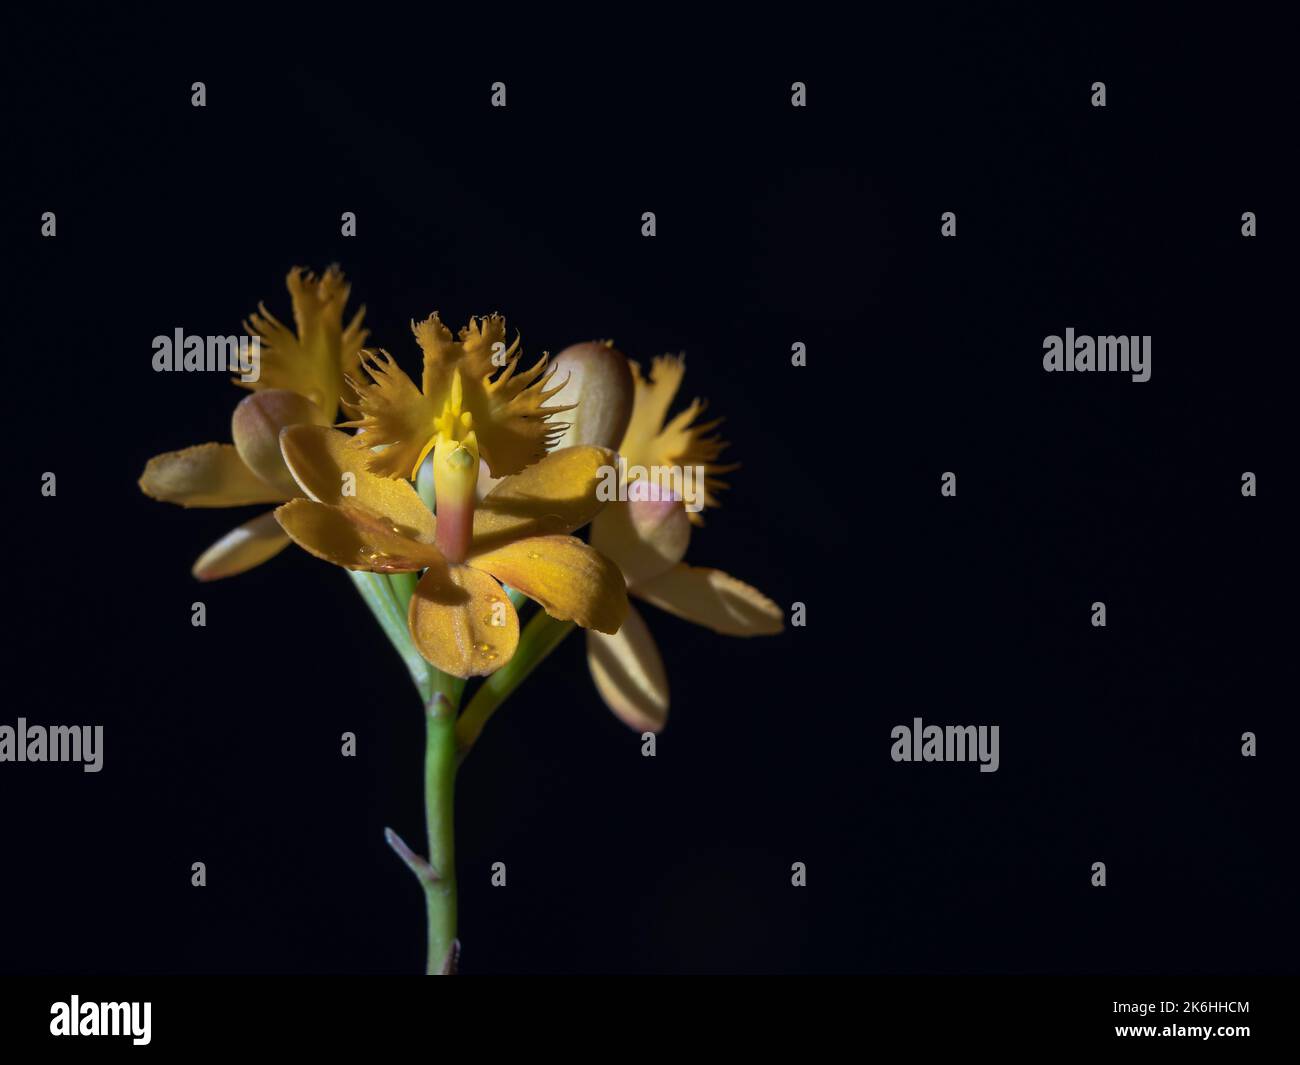 Closeup view of beautiful epidendrum epiphytic tropical orchid blooming with bright yellow orange flowers and bud isolated on black background Stock Photo